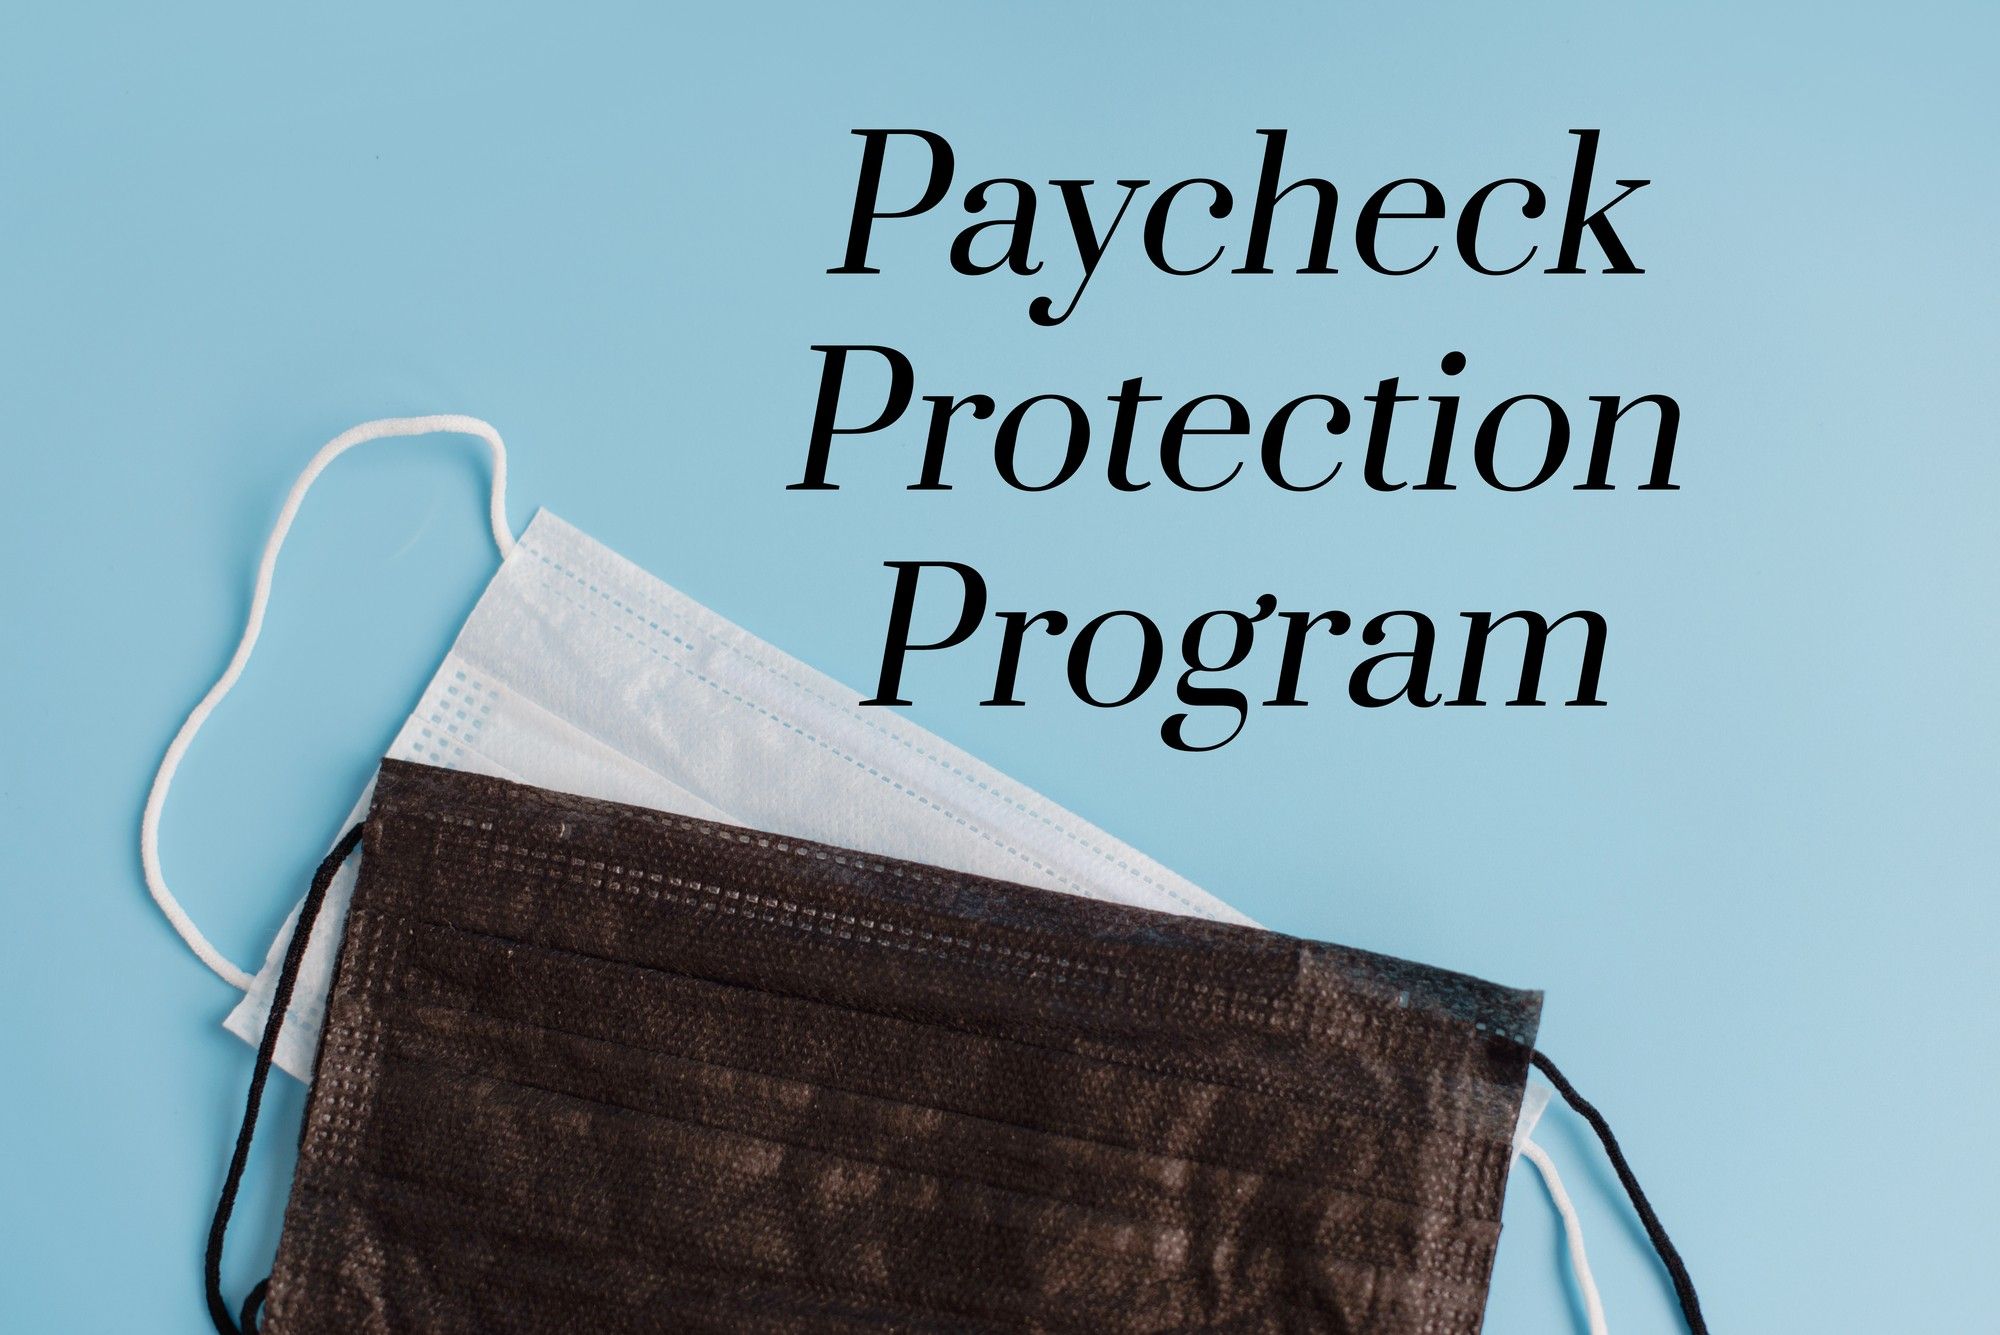 Paycheck Protection Program falls subject to loan fraud.